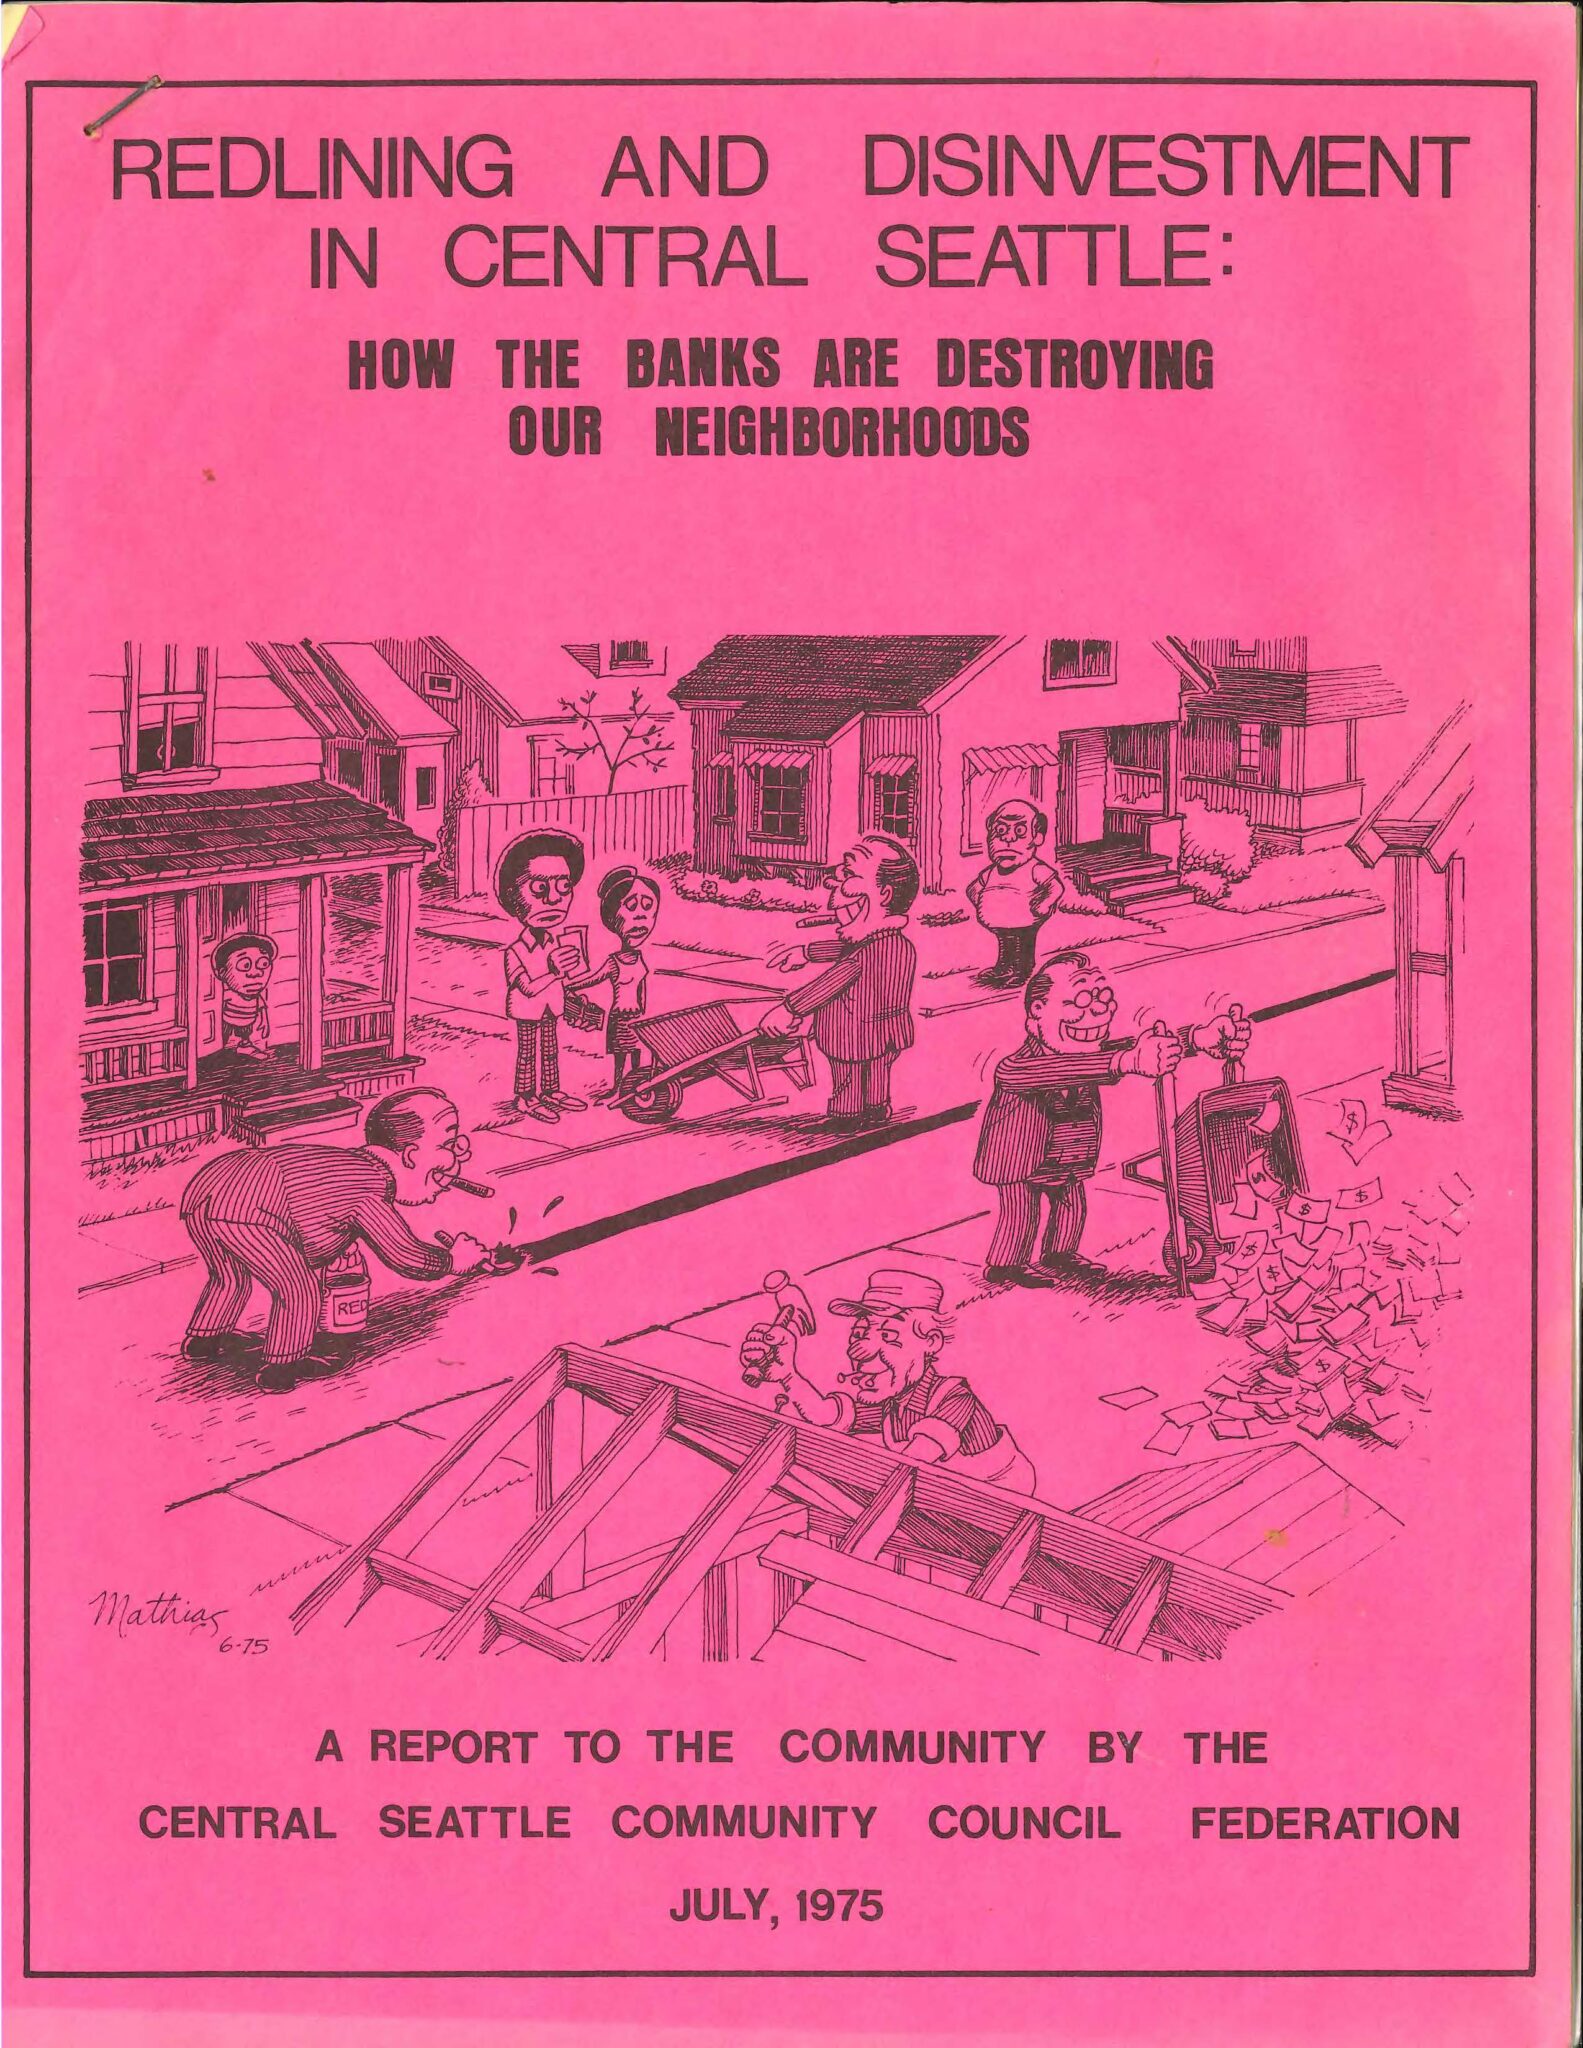 A poster in bright pink that says "Redlining and Disinvestment in Central Seattle: How the Banks are Destroying Our Neighborhoods."